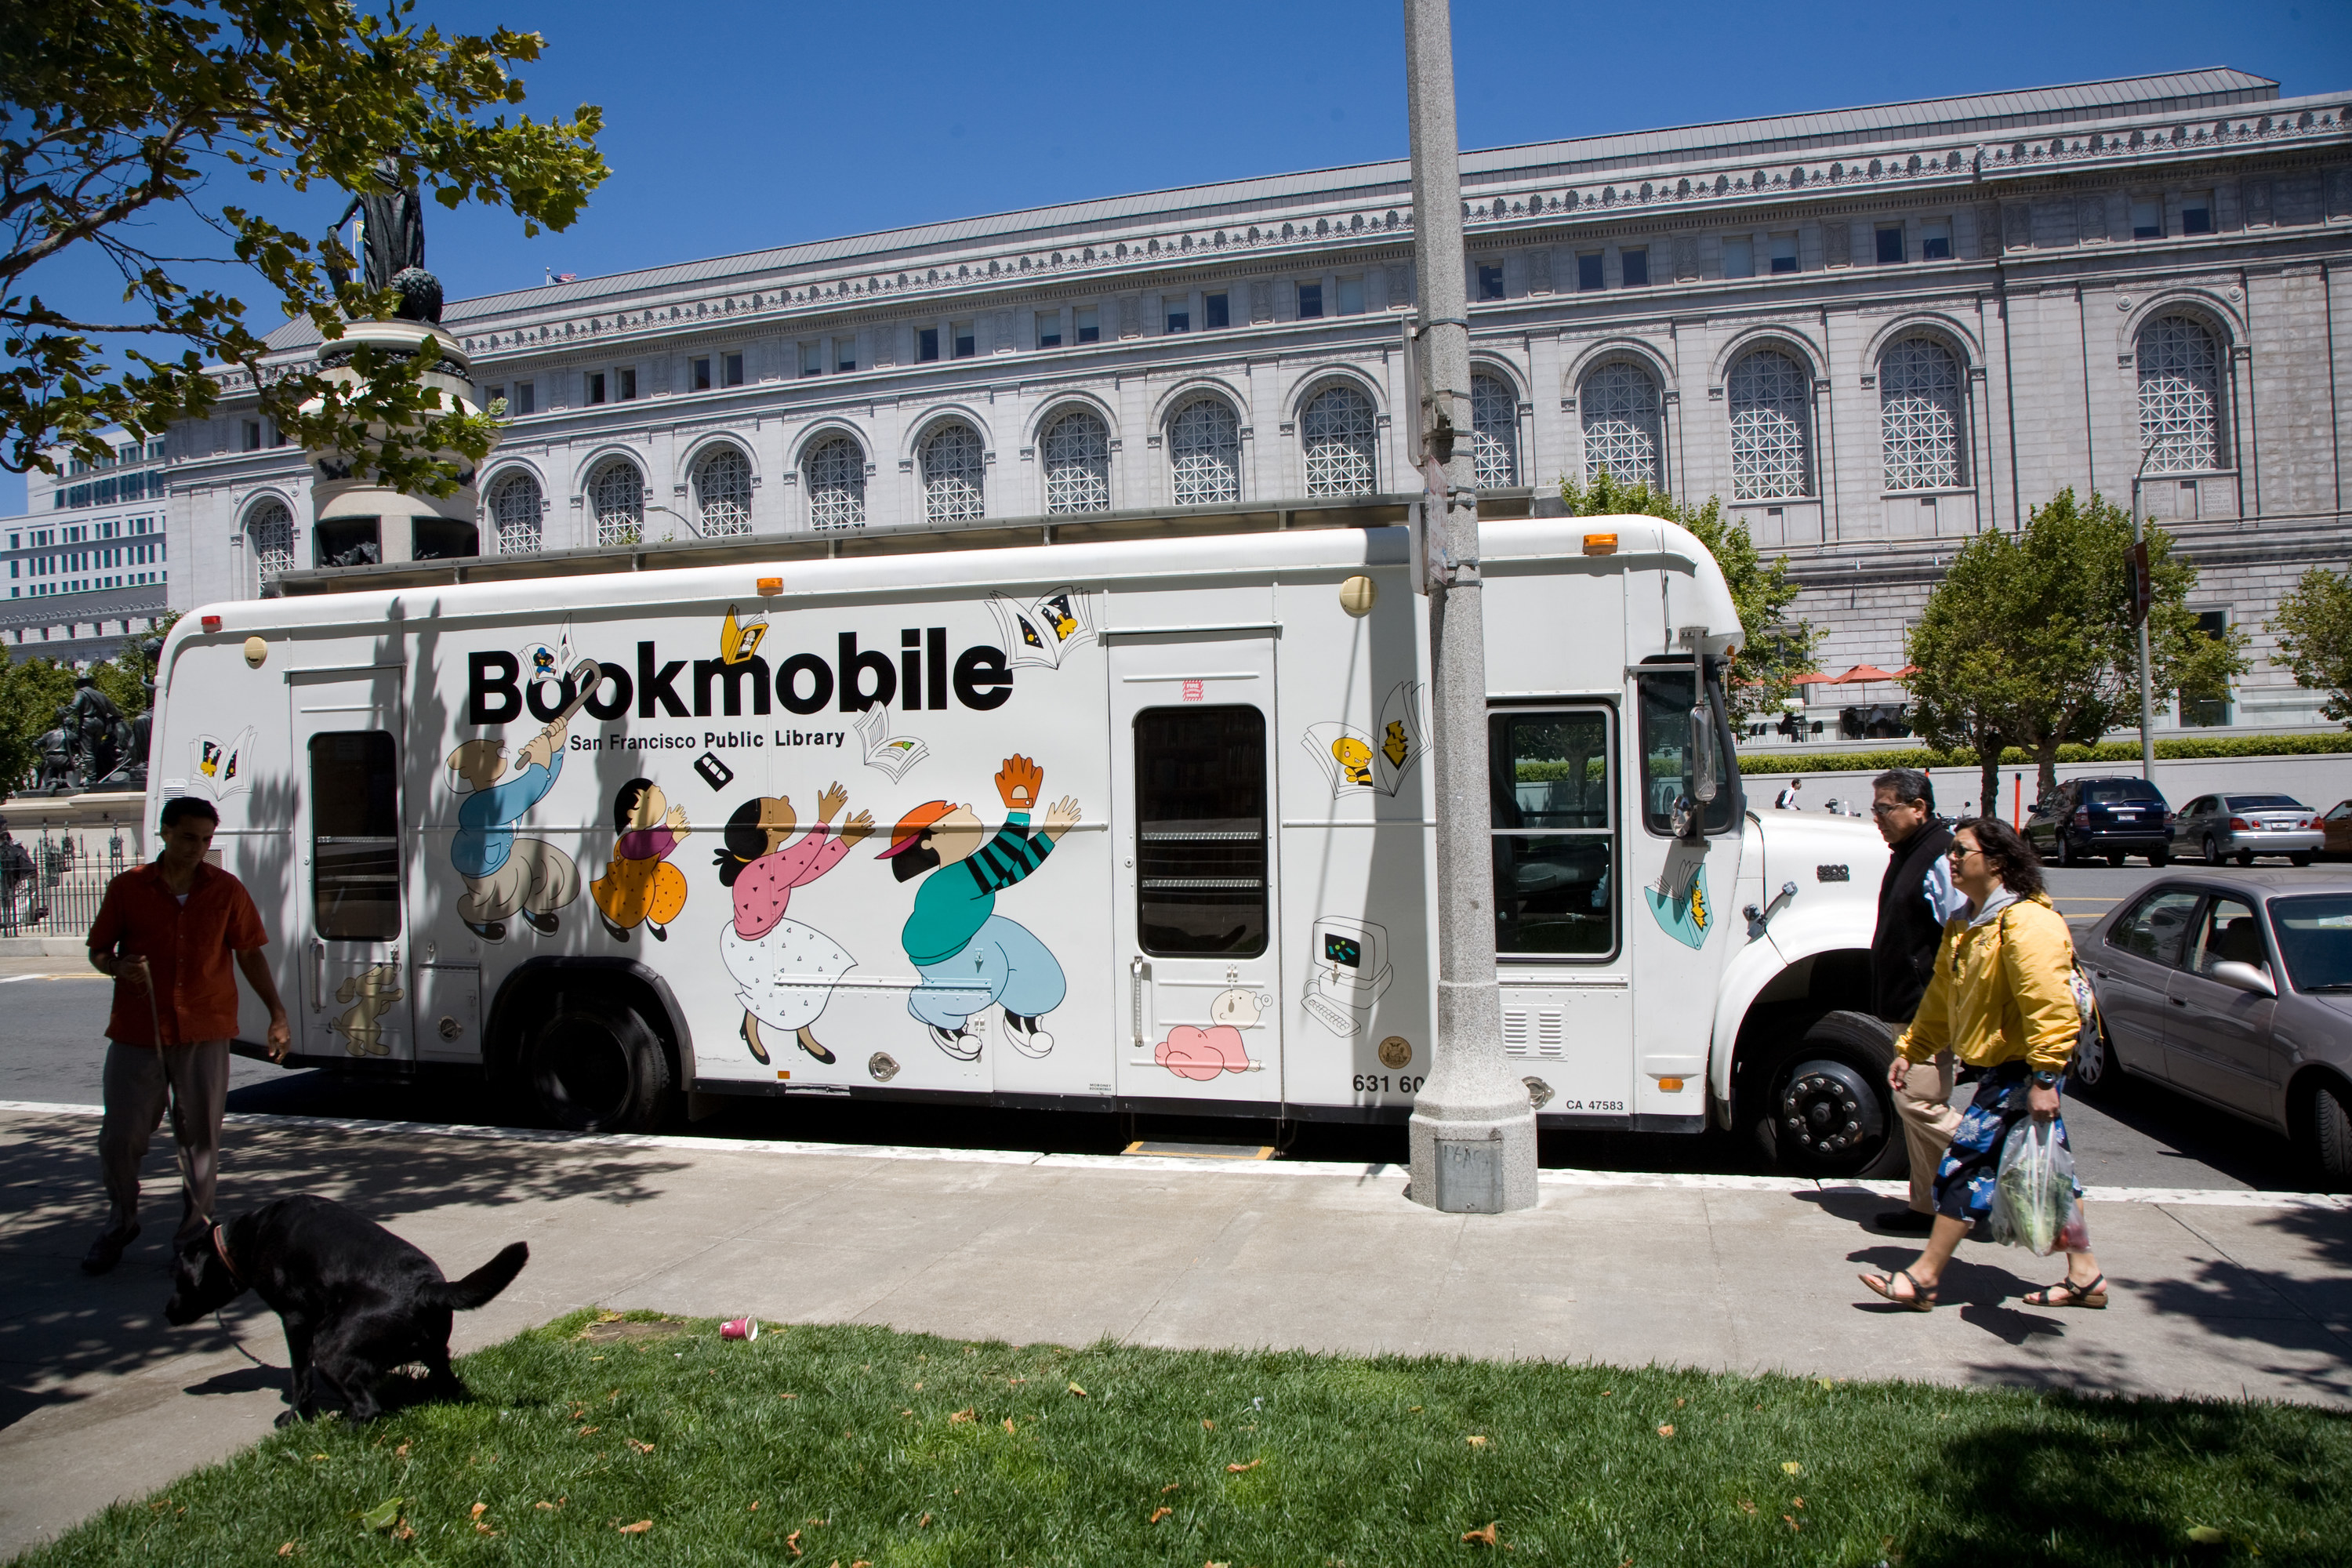 a bookmobile parked on the street